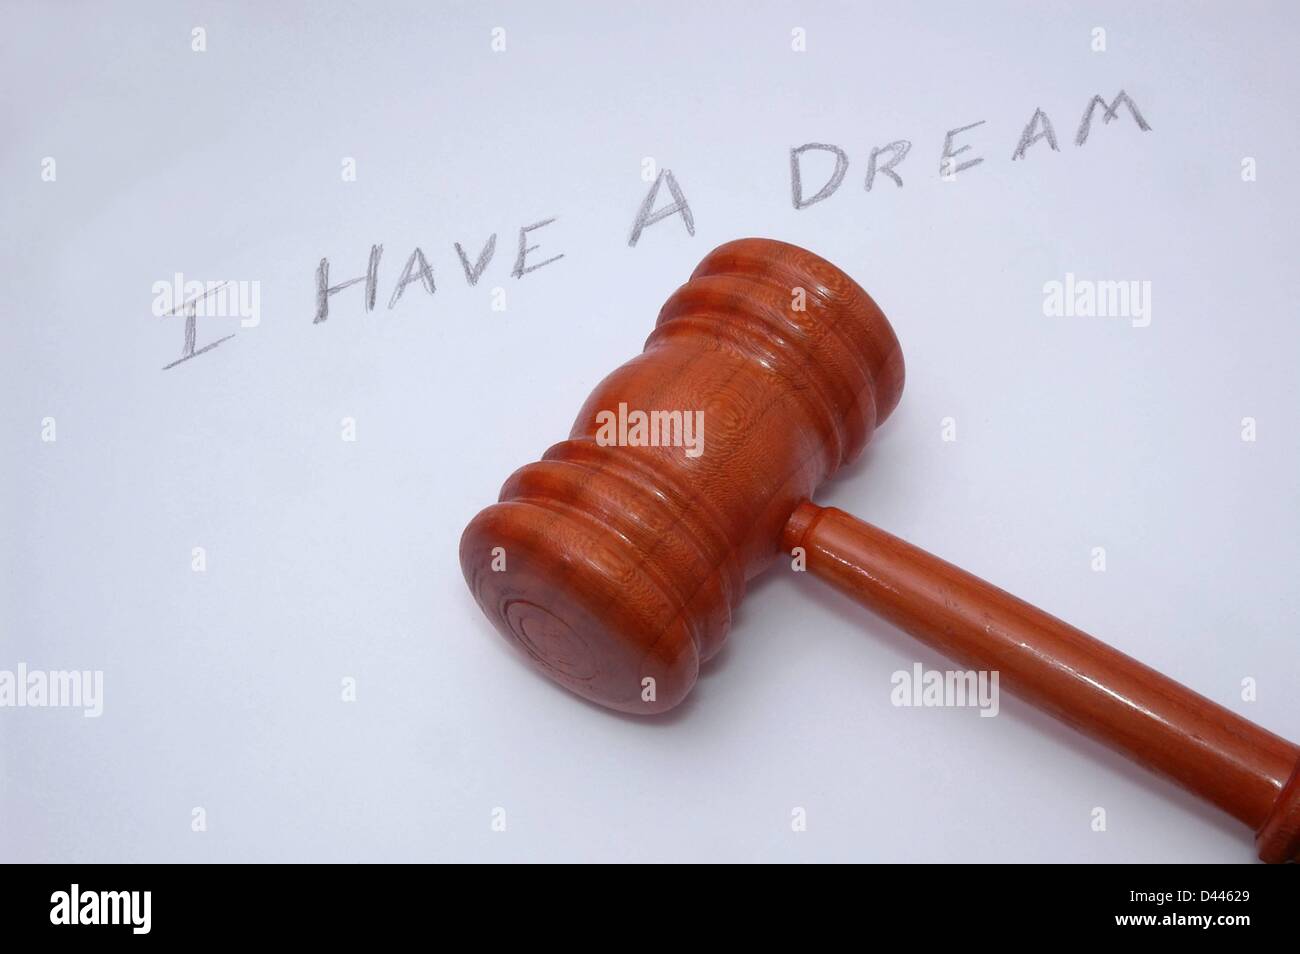 Illustration - A gavel is pictured next to the writing 'I have a dream' in Berlin, Germany, 22 December 2007. Photo: Berliner Verlag/S.Steinach Stock Photo